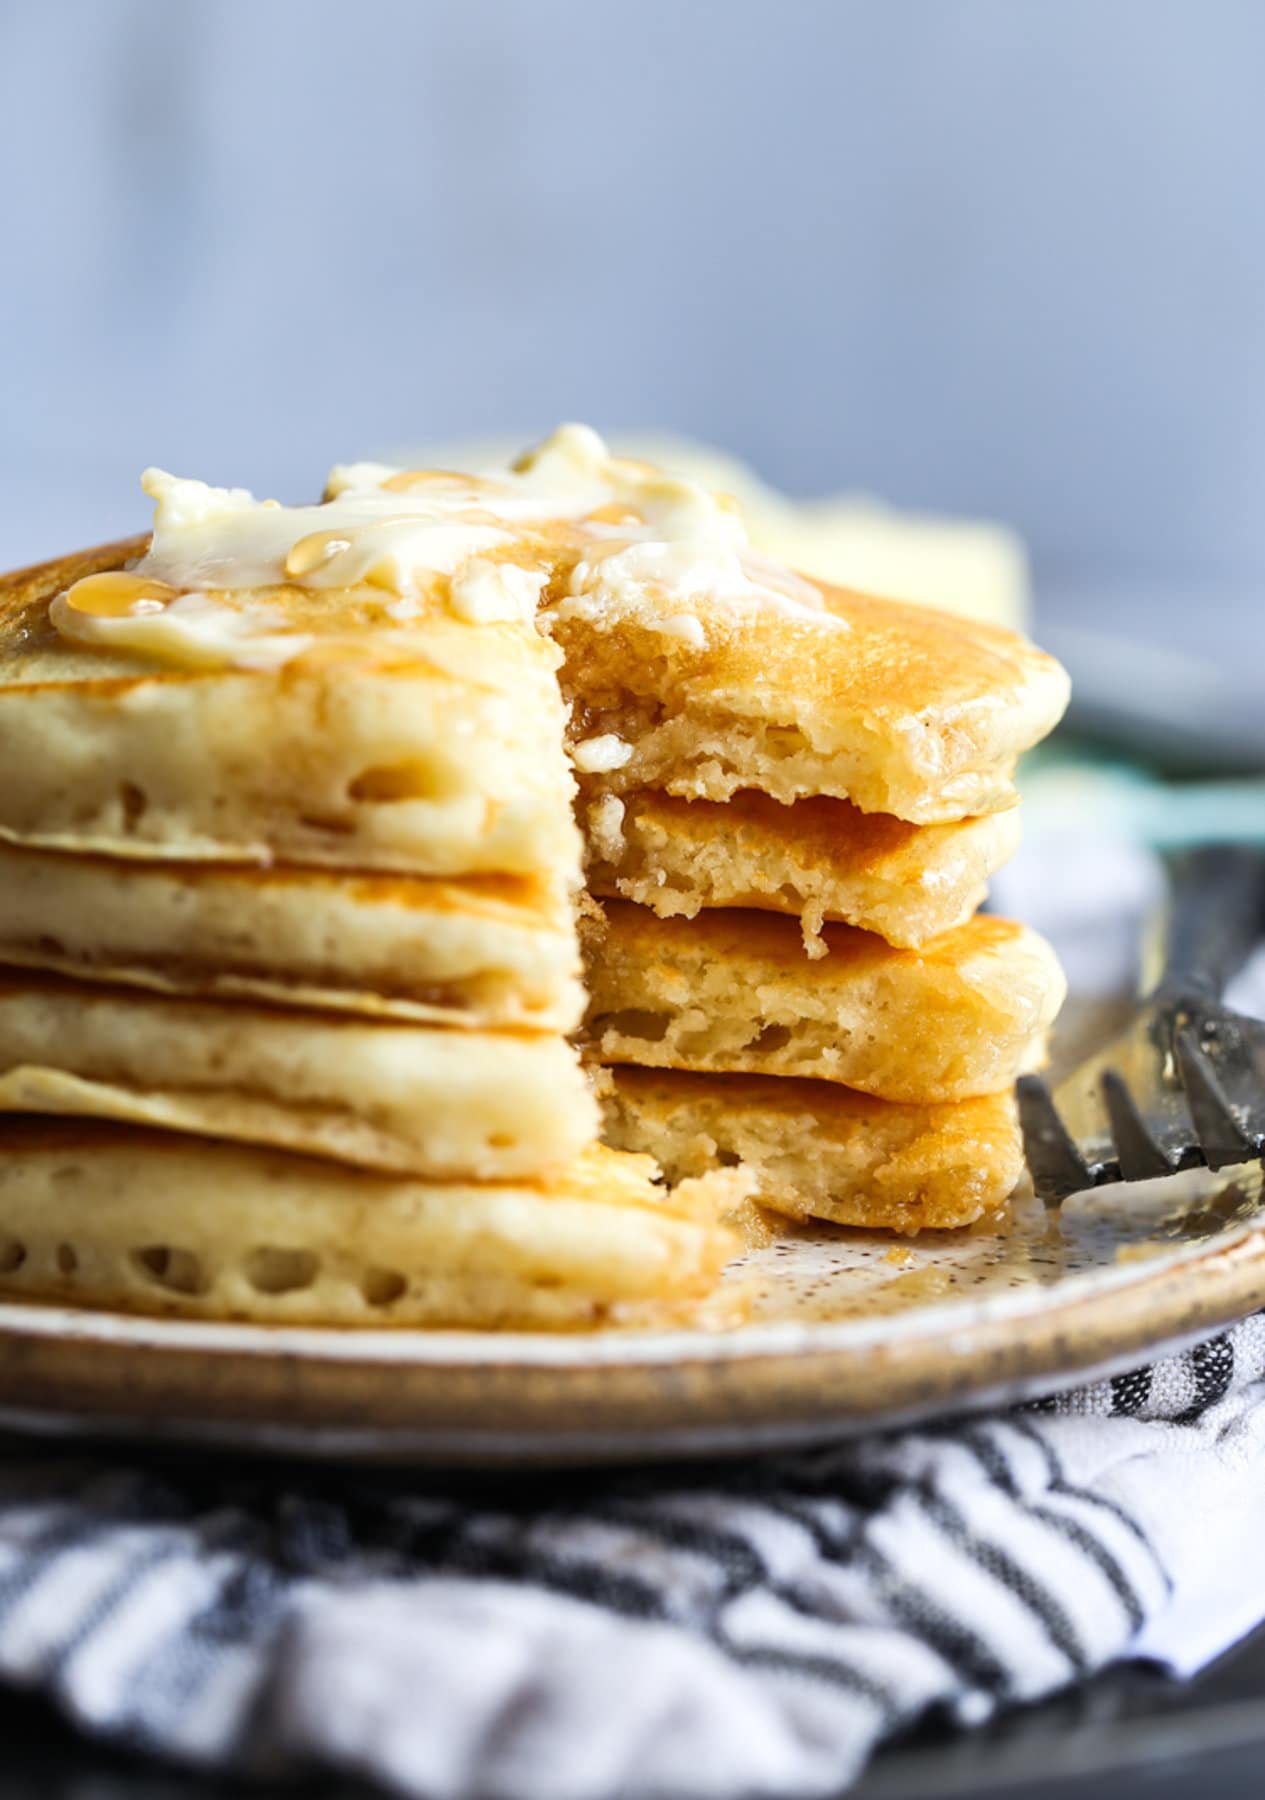 Buttermilk pancakes stacked on a plate with butter and syrup cut into showing the fluffy interior